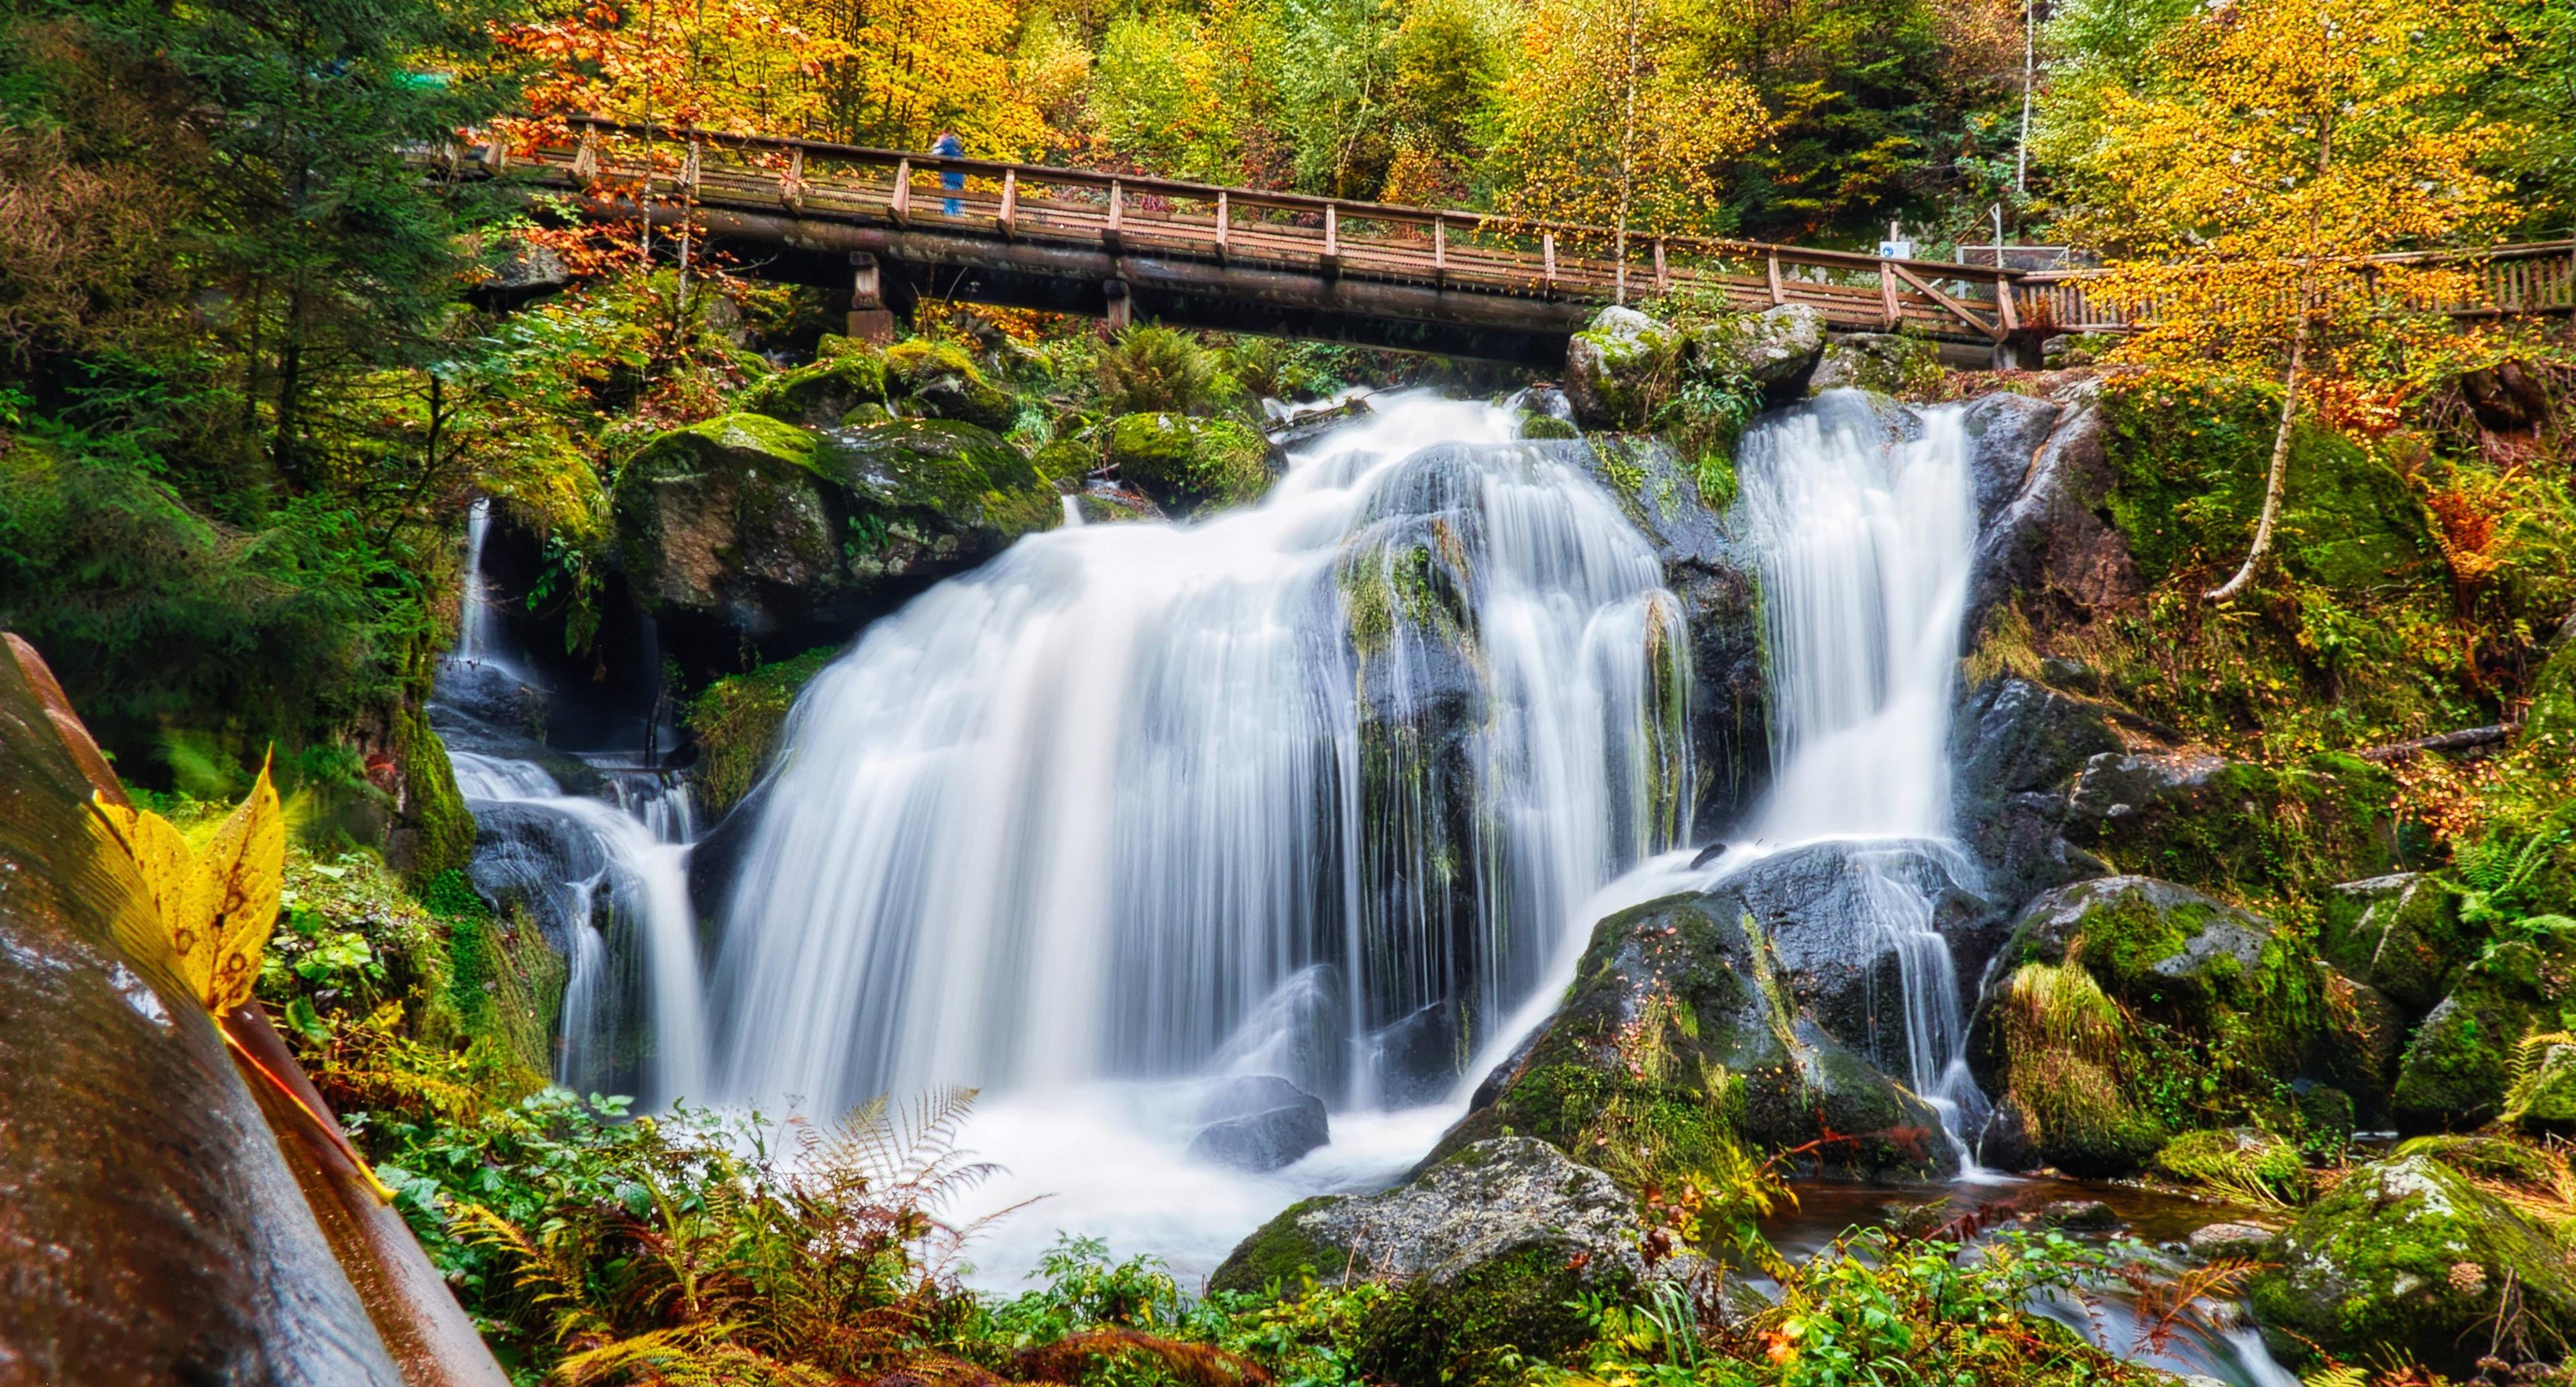 The Most Beautiful Waterfalls and the Cuckoo Clock Town